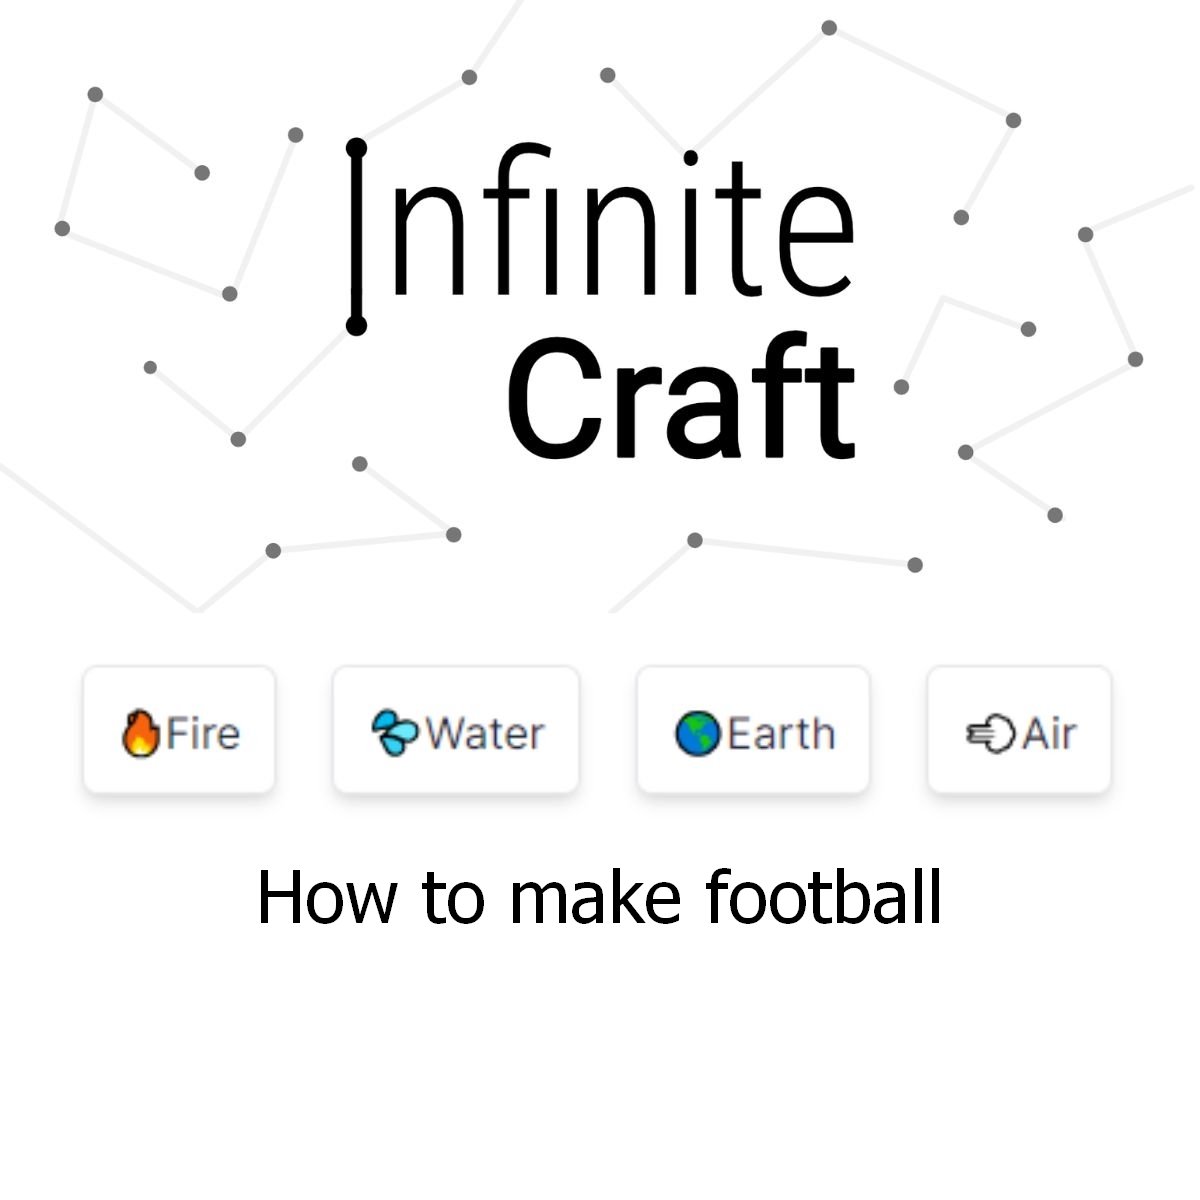 how to make football in infinite craft